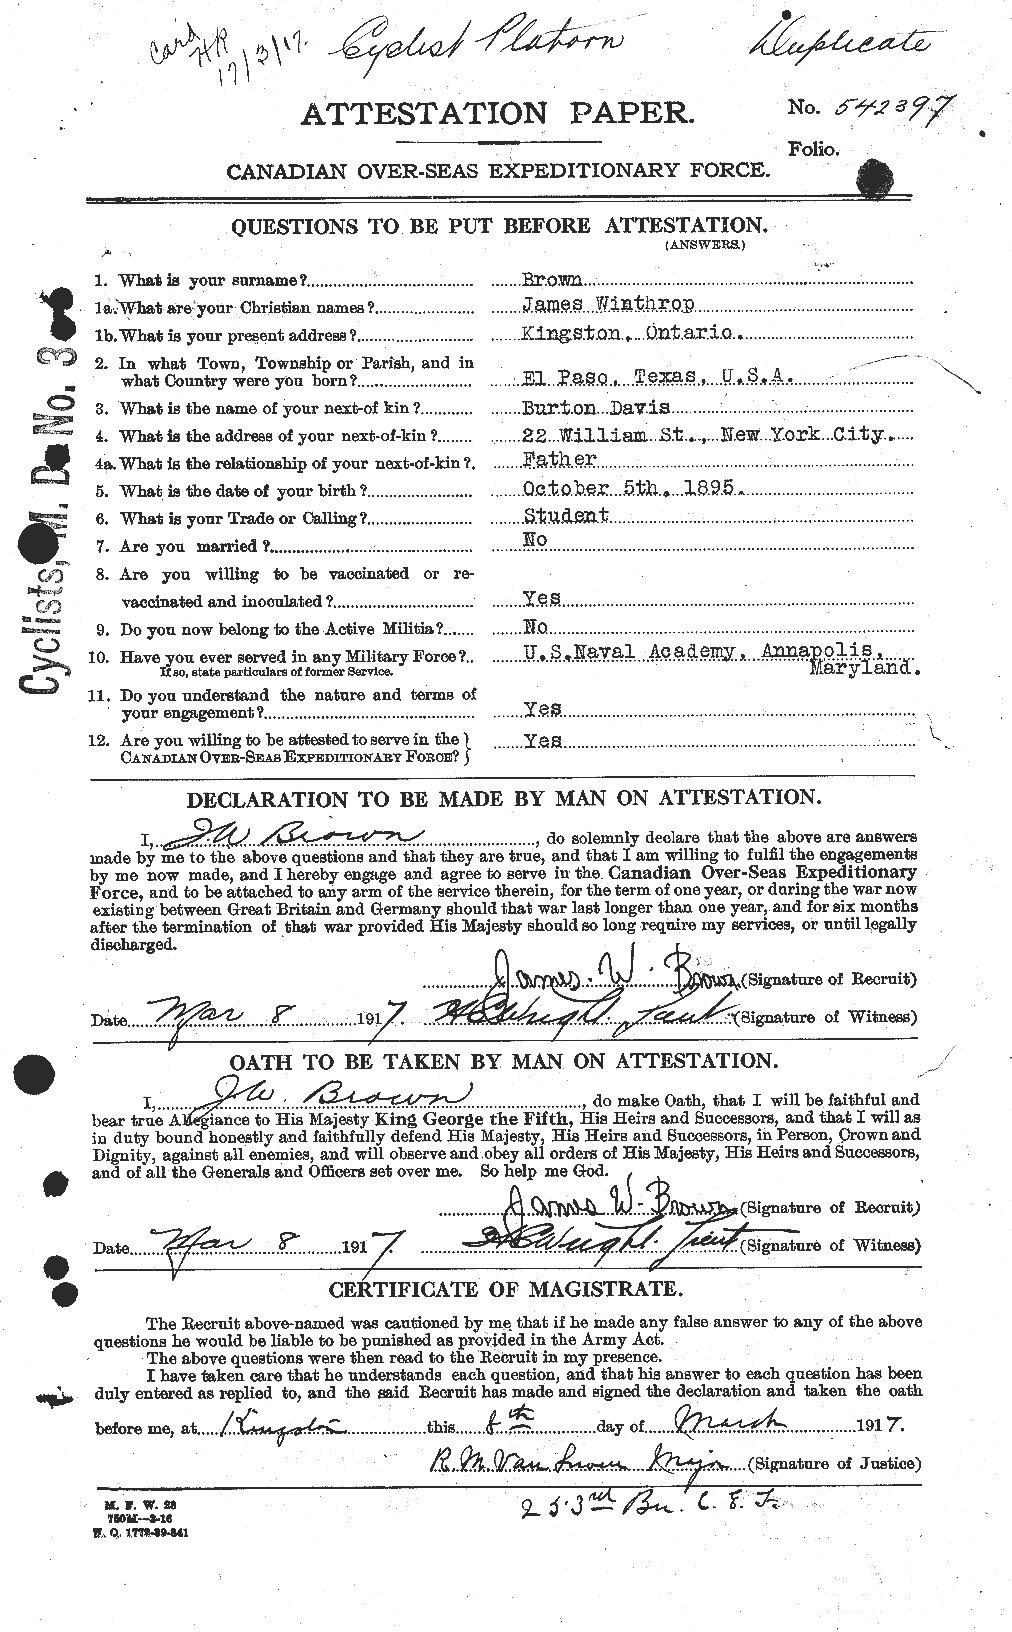 Personnel Records of the First World War - CEF 269608a